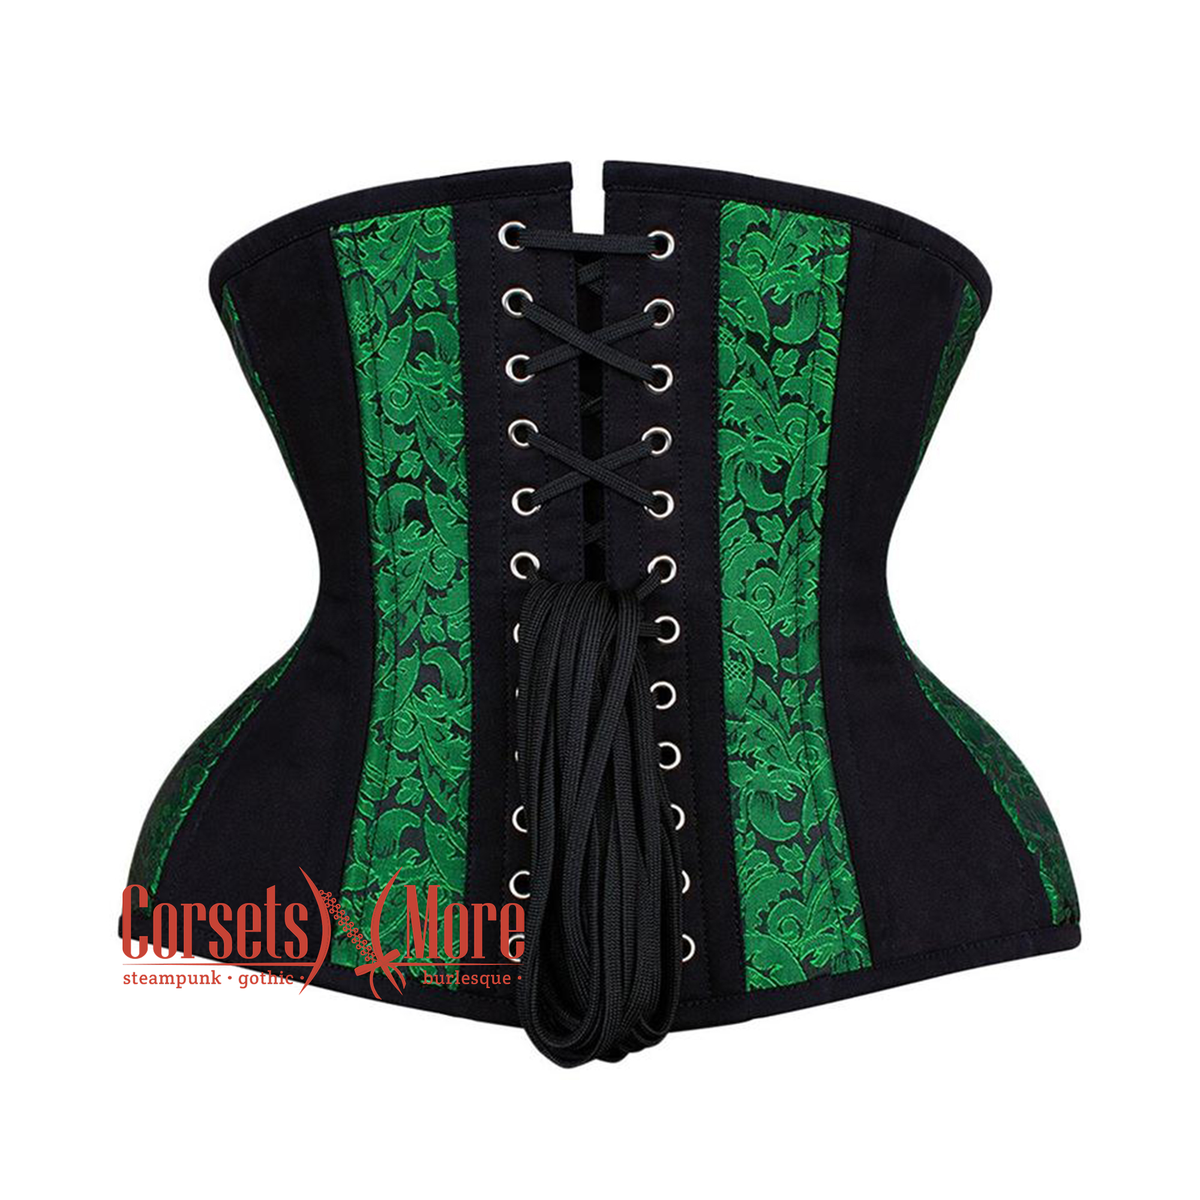 Black Pin Stripe Underbust Steampunk corset from The Altered City